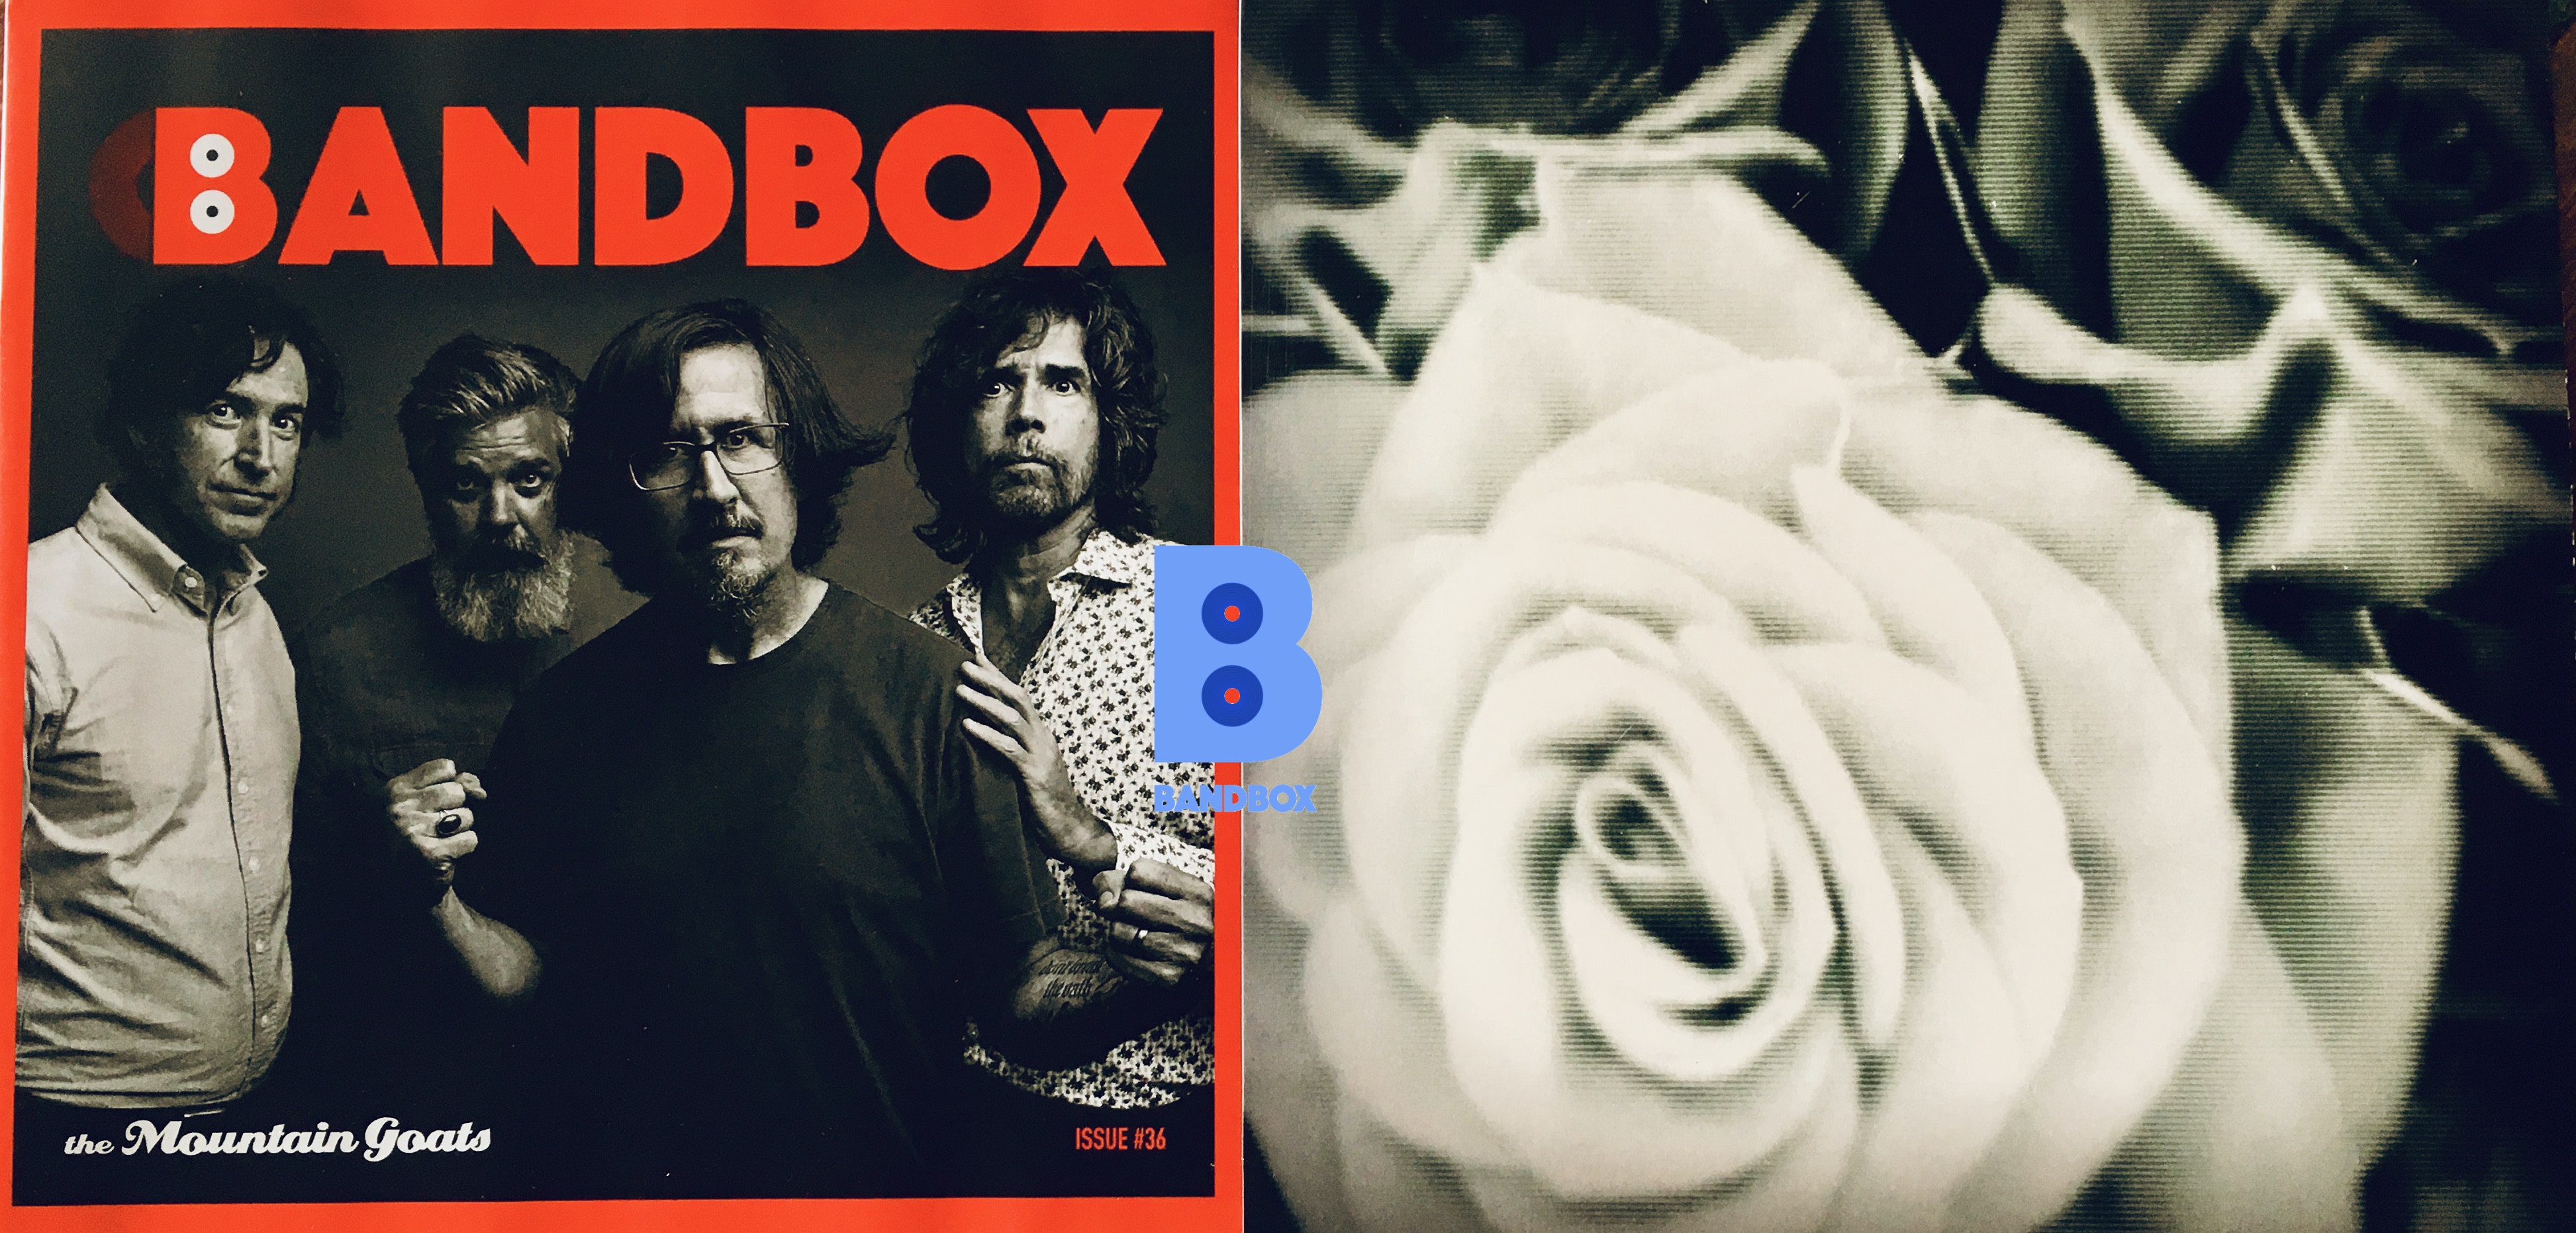 Geek insider, geekinsider, geekinsider. Com,, bandbox unboxed vol. 21 - the mountain goats, entertainment